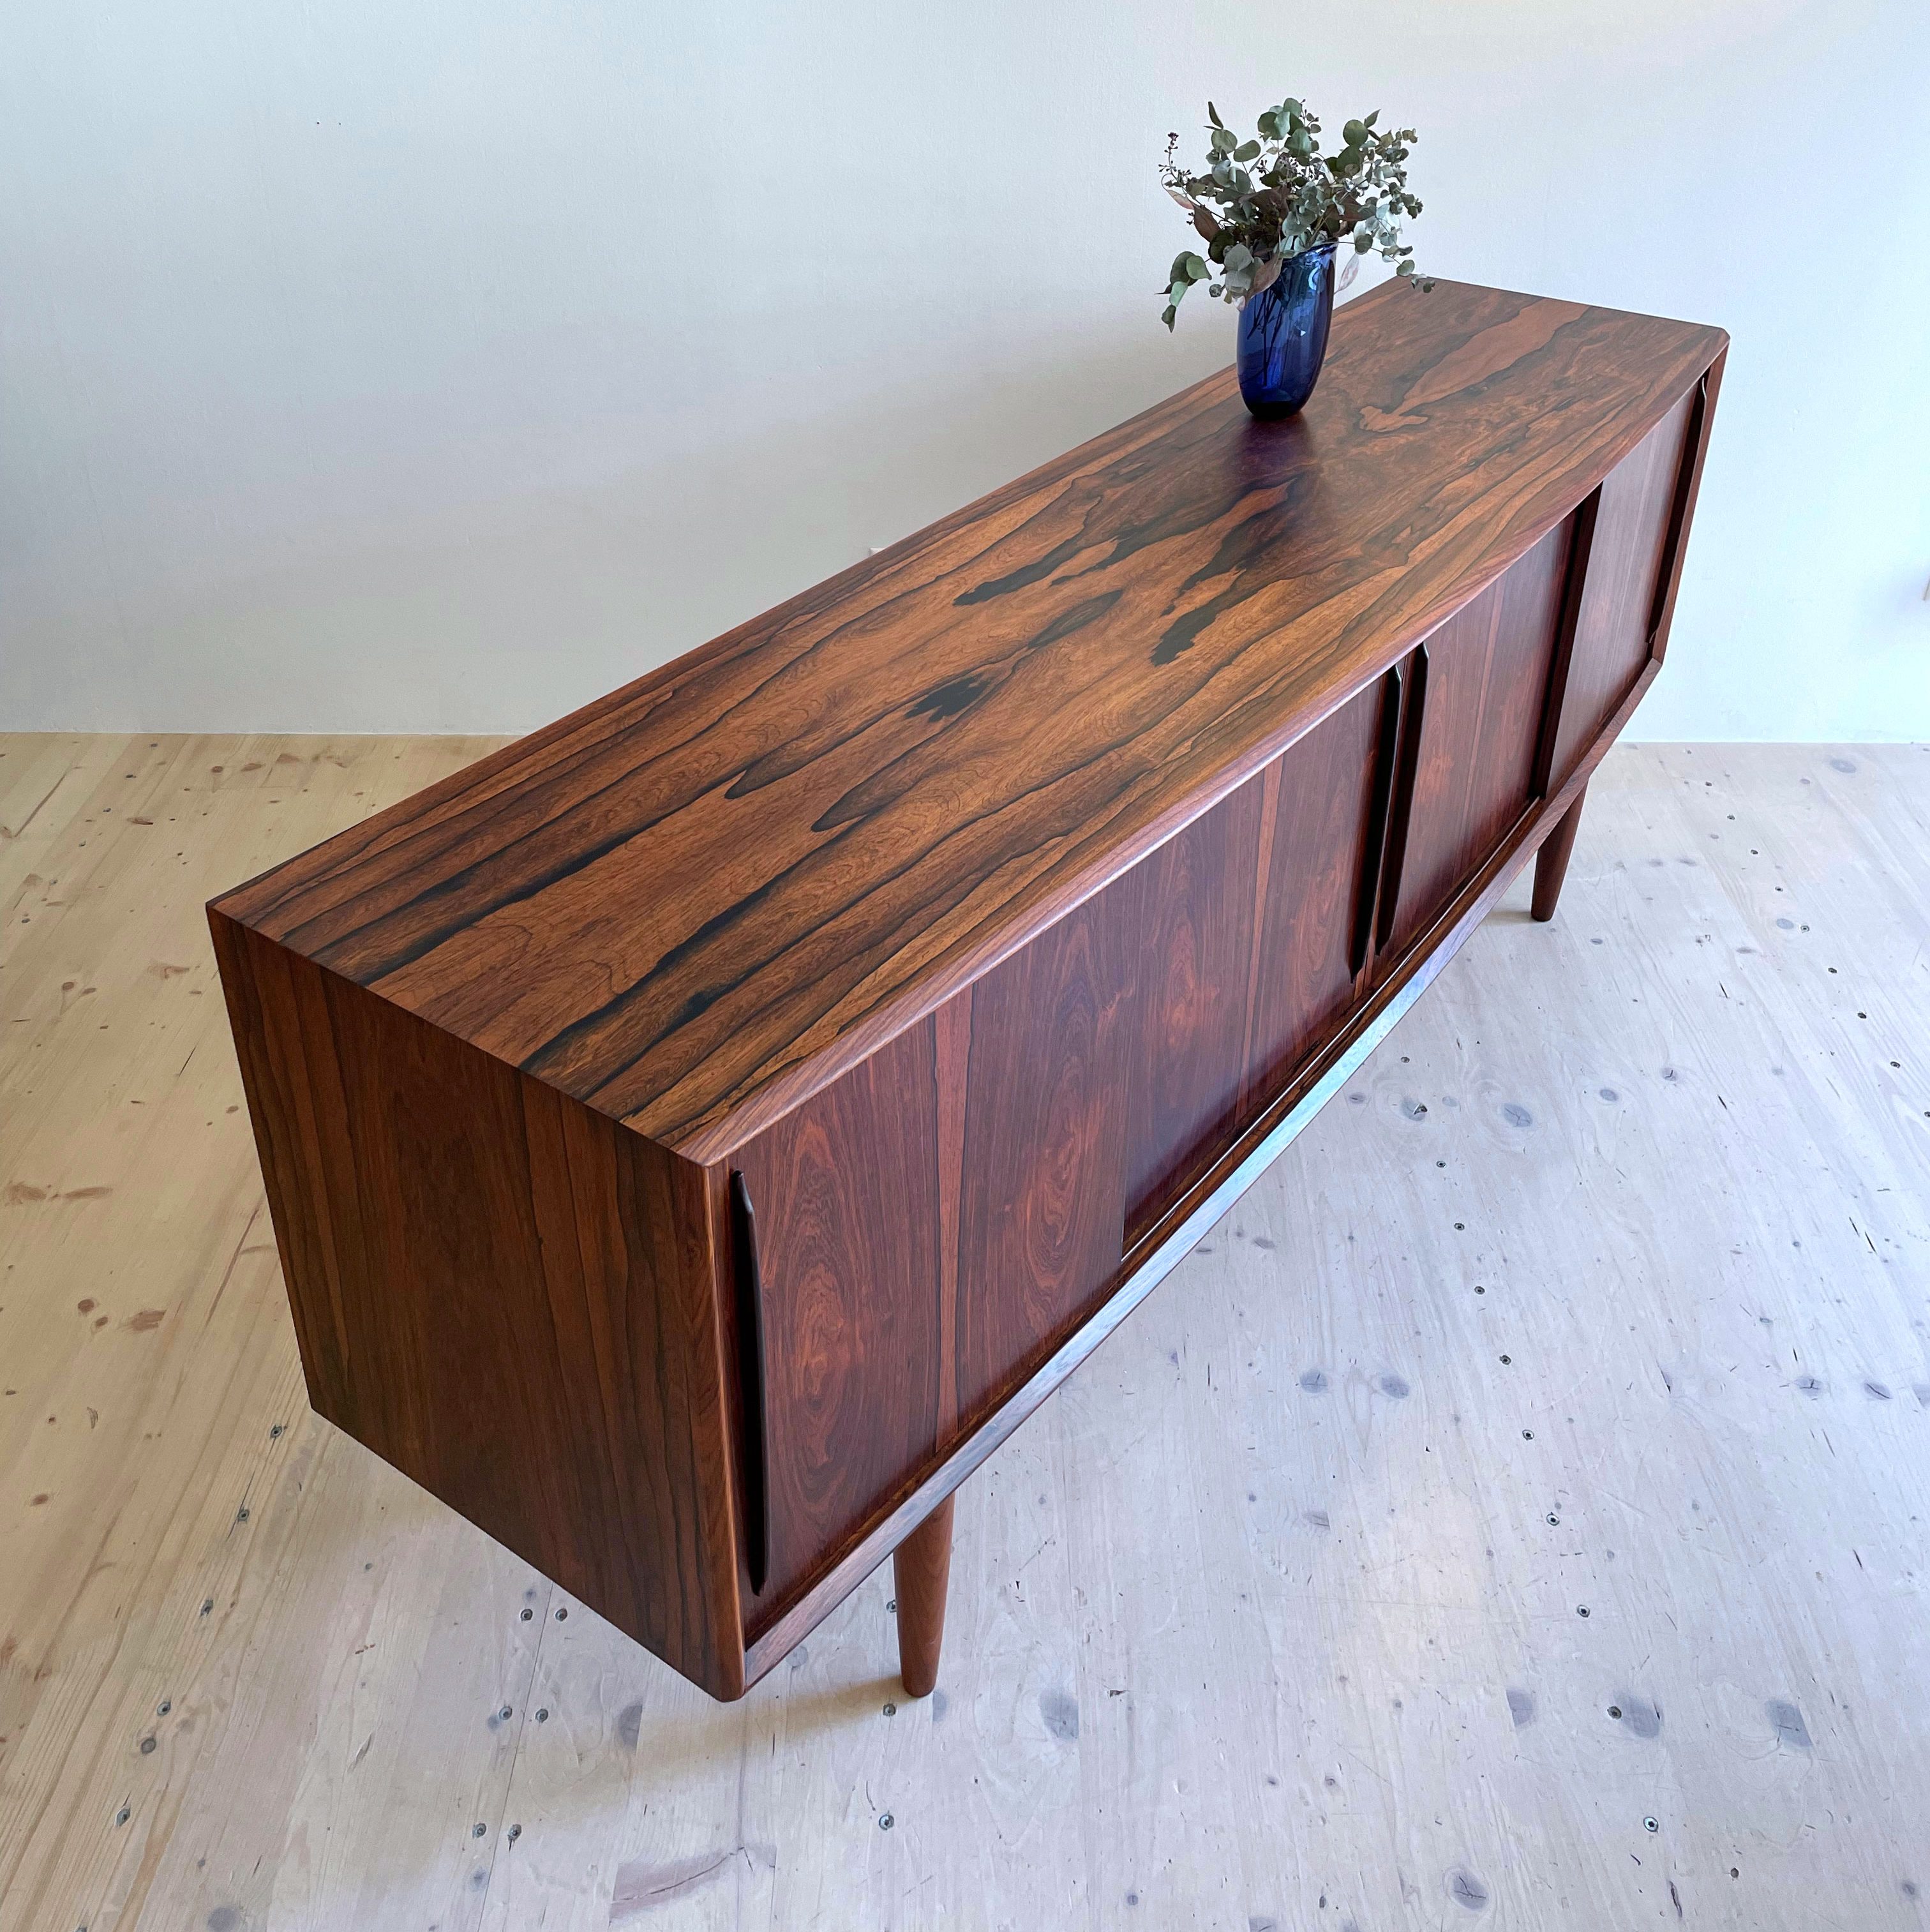 Rosewood Sideboard with Bowed Design. Designed by Svend Aage Madsen for HP Hansen. Made in Denmark, 1960s. Available at heyday möbel, Grubenstrasse 19, 8045 Zürich, Switzerland.